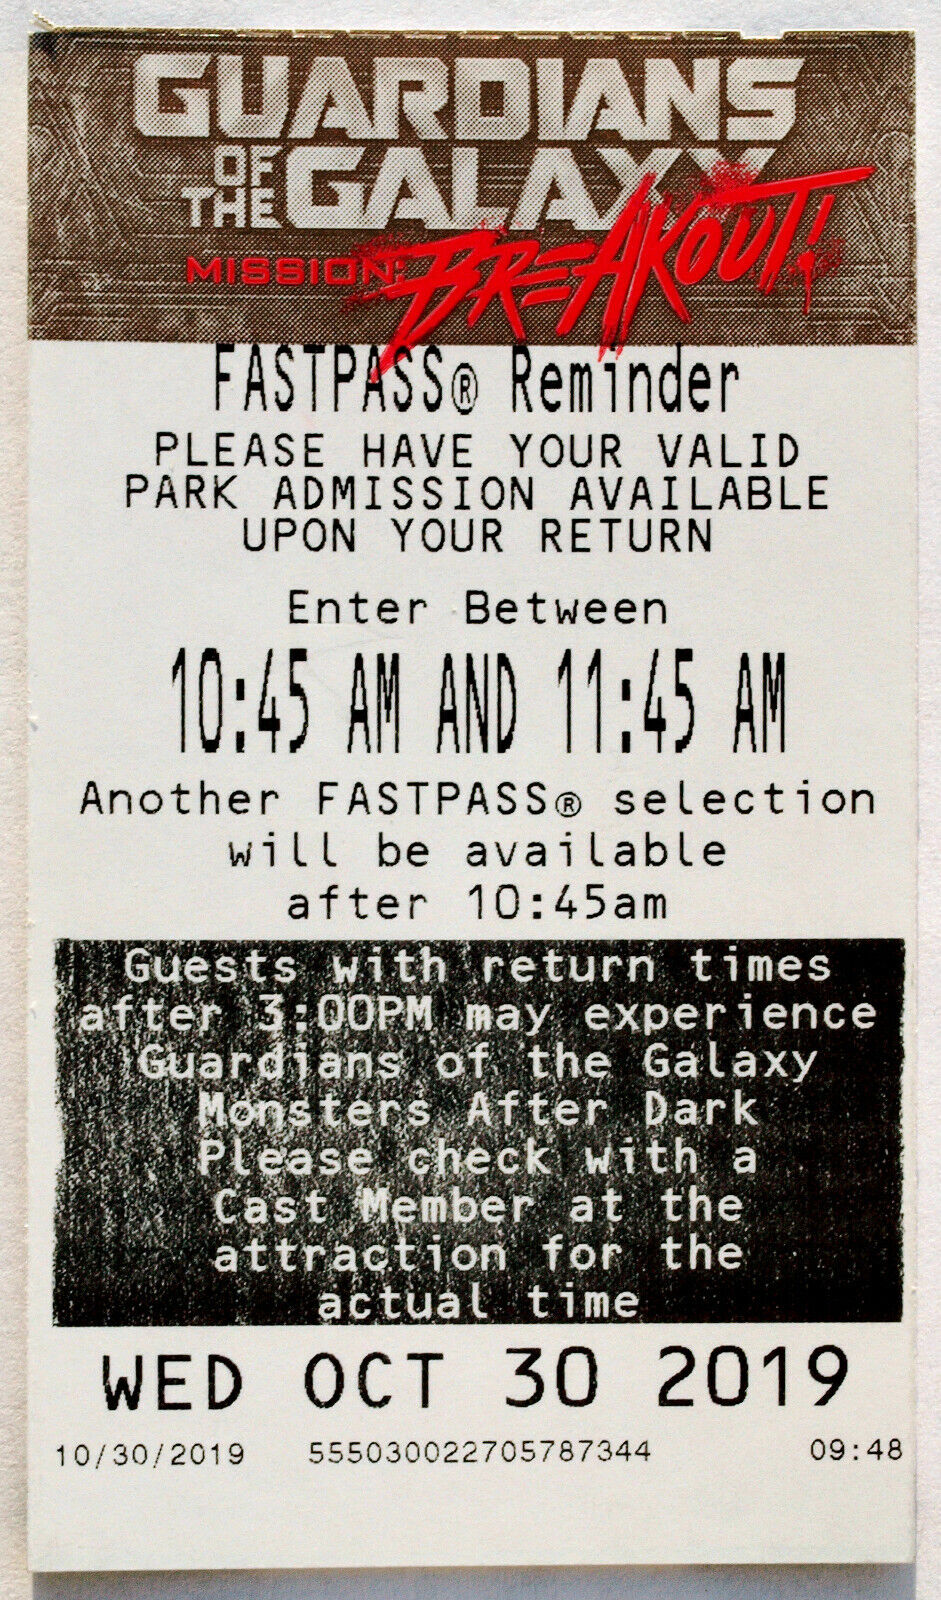 Calif. Adventure Fastpass: Guardians of the Galaxy Monsters After Dark 2019 LC1